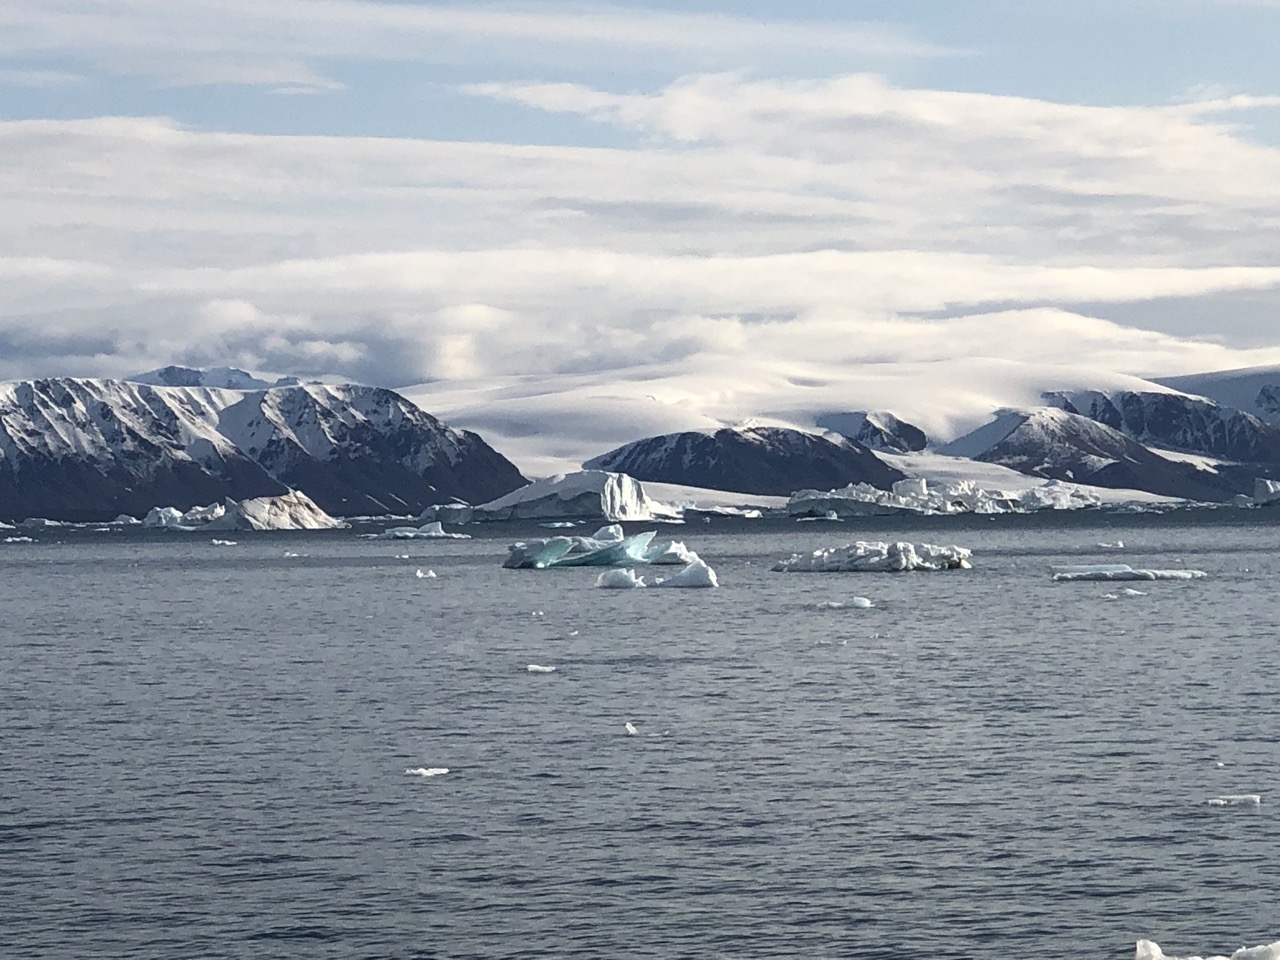 A photo of the ocean with icebergs and mountains in the background